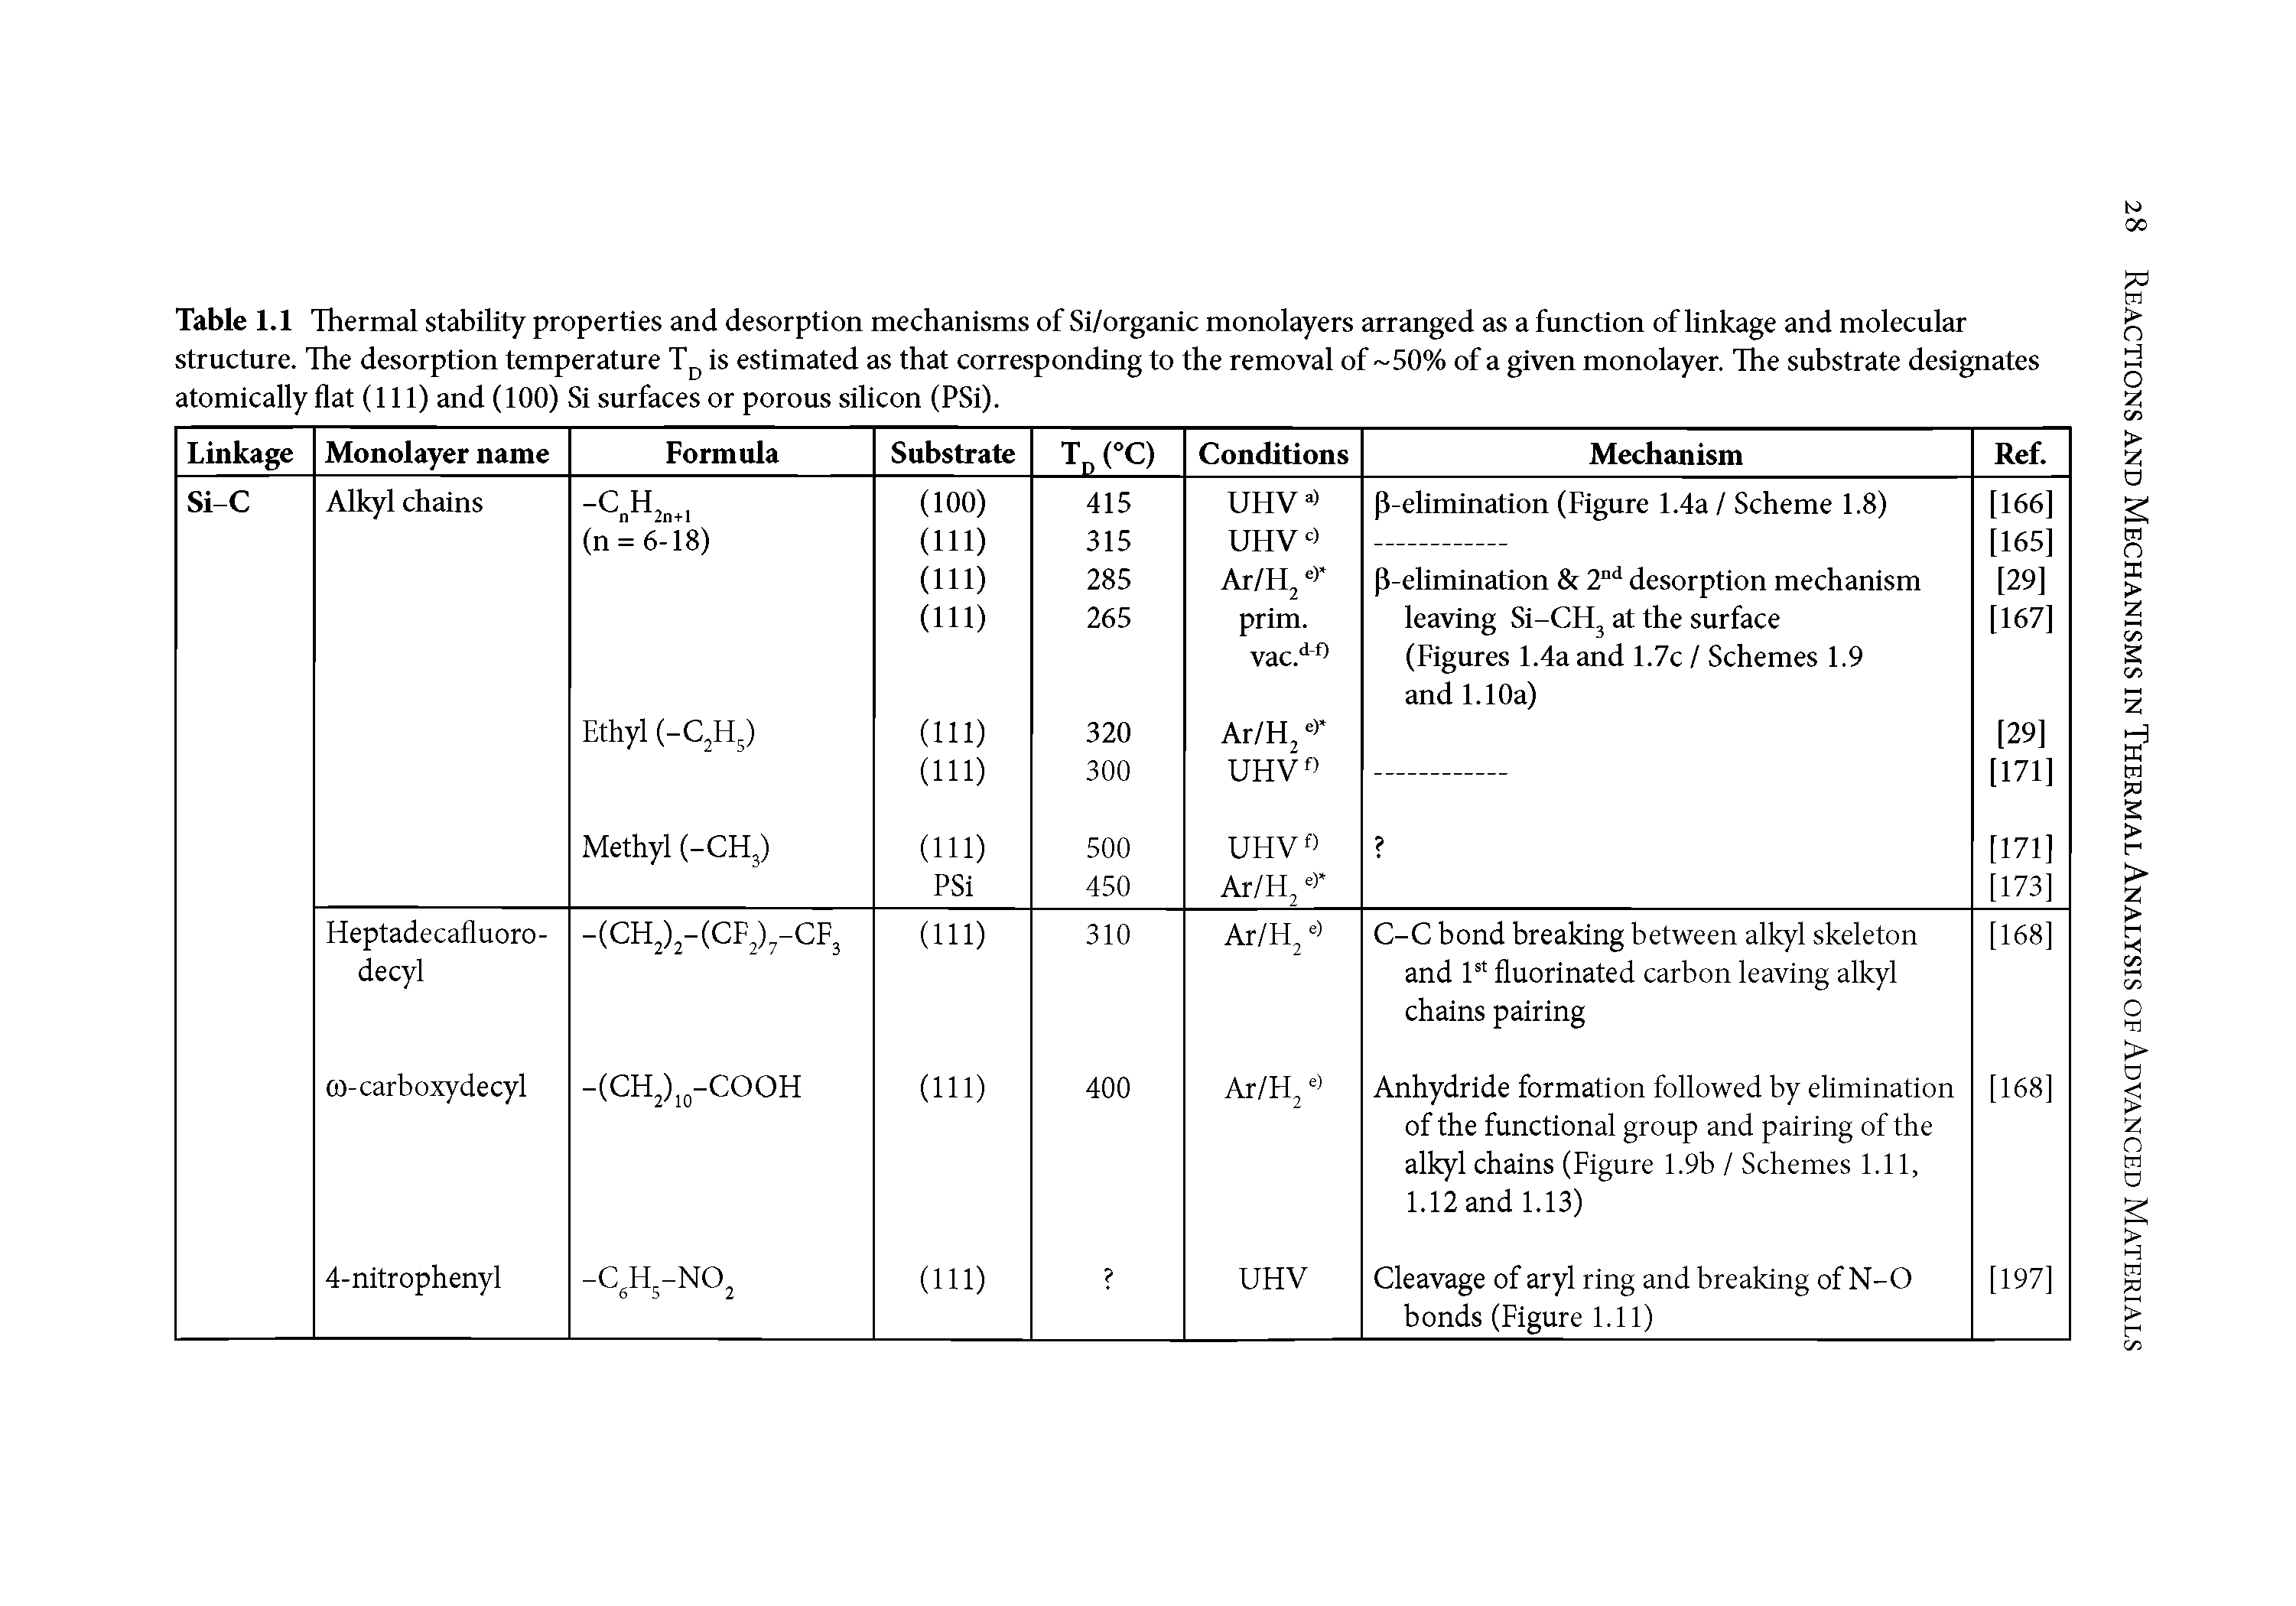 Table 1.1 Thermal stability properties and desorption mechanisms of Si/organic monolayers arranged as a function of linkage and molecular structure. The desorption temperature is estimated as that corresponding to the removal of 50% of a given monolayer. The substrate designates atomically flat (111) and (100) Si surfaces or porous silicon (PSi).